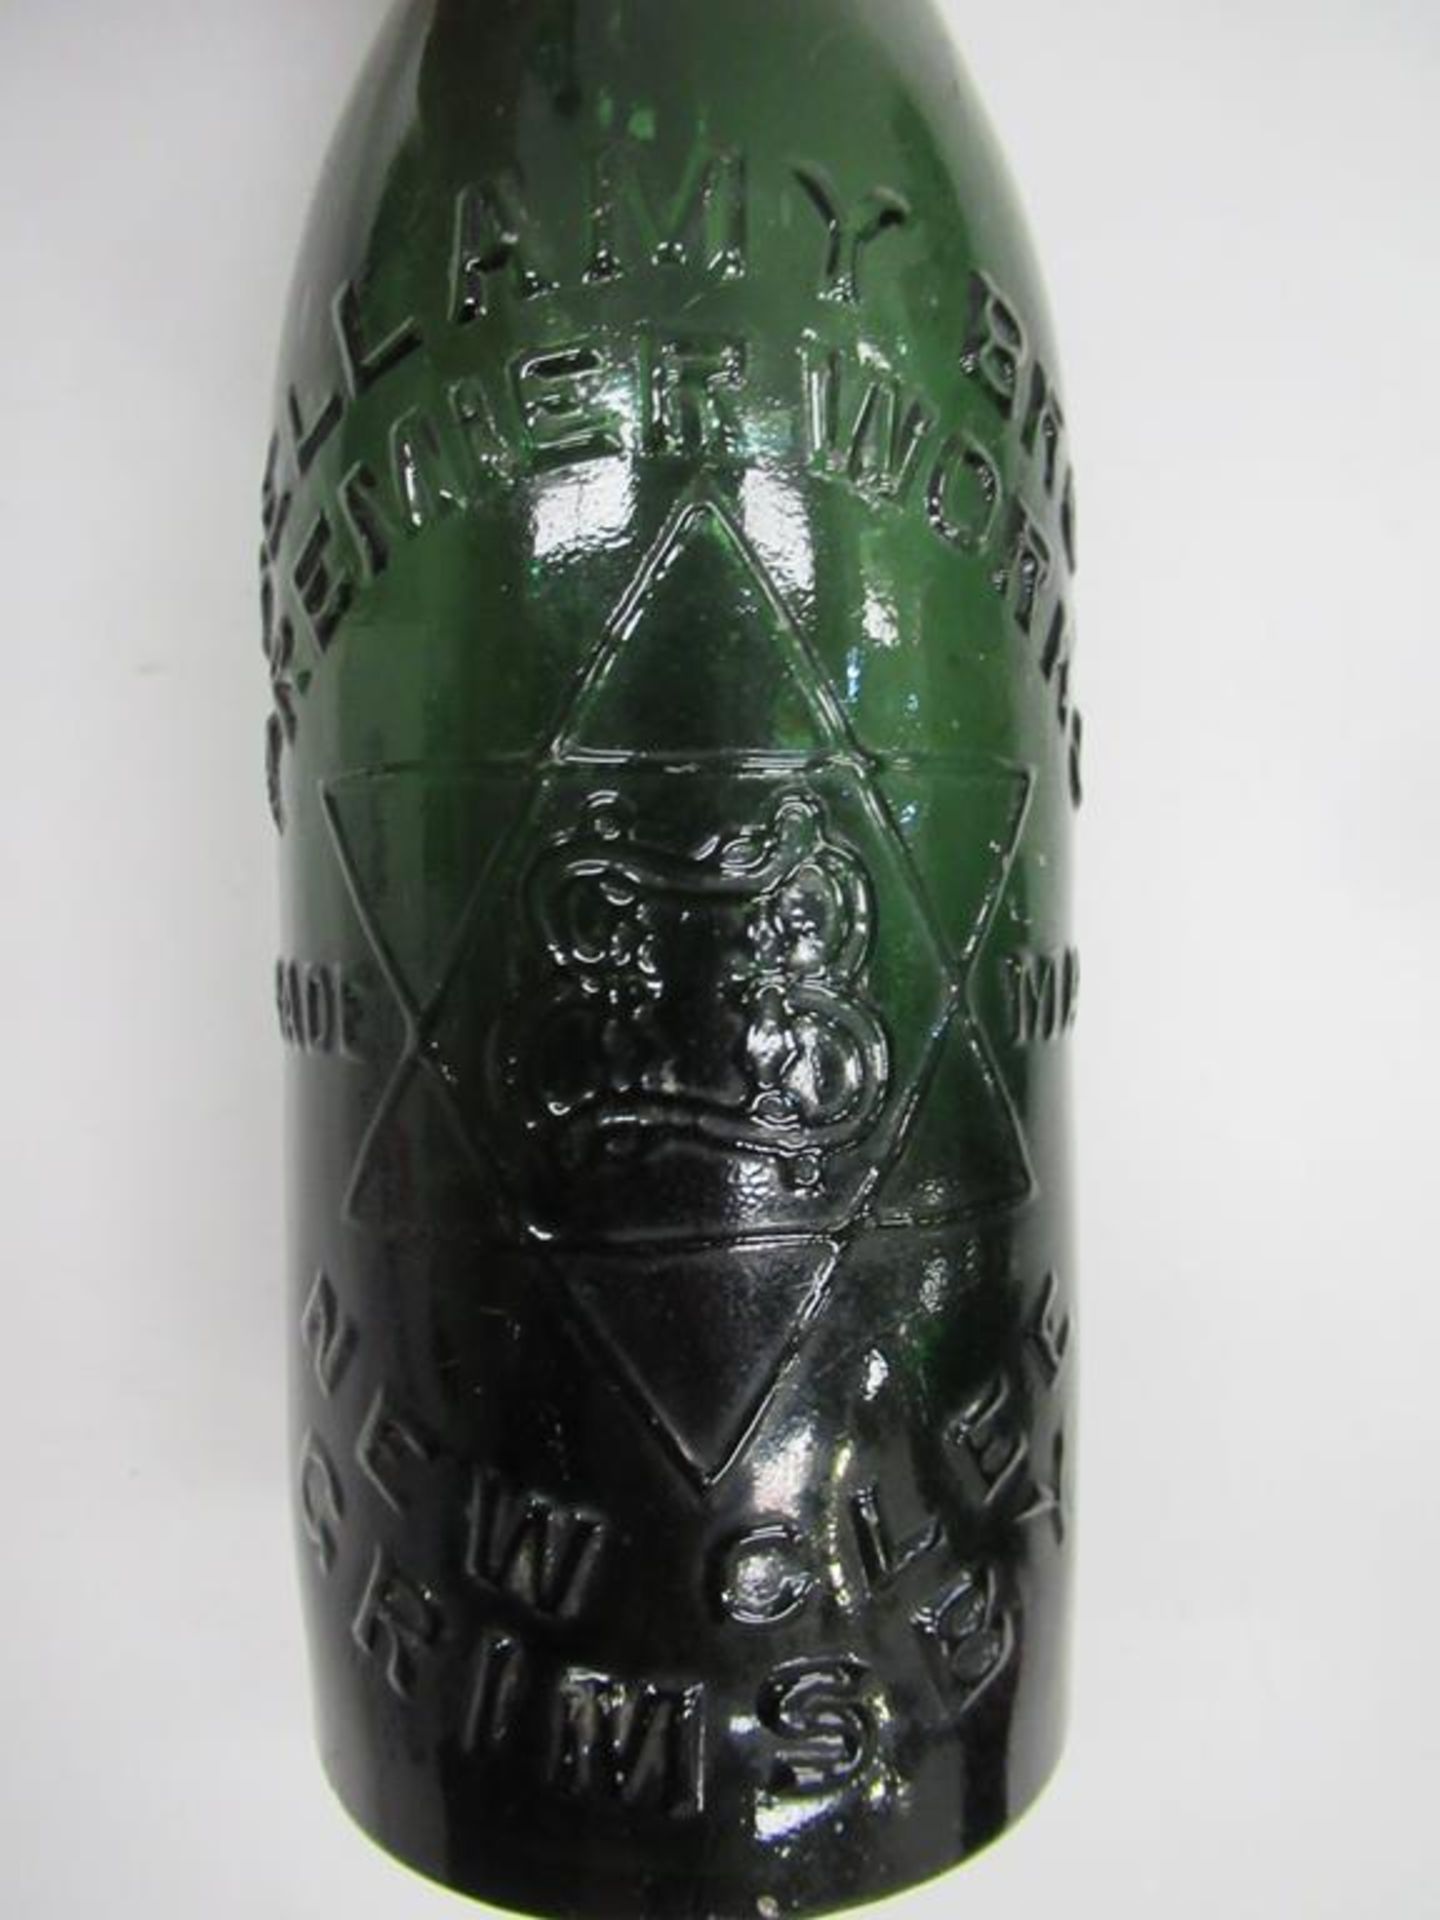 8x Bellamy Bro's (7) and Bellamy Bros Cuthbert coloured bottles (5x Grimsby, 3x Grimsby & Louth) - Image 11 of 28